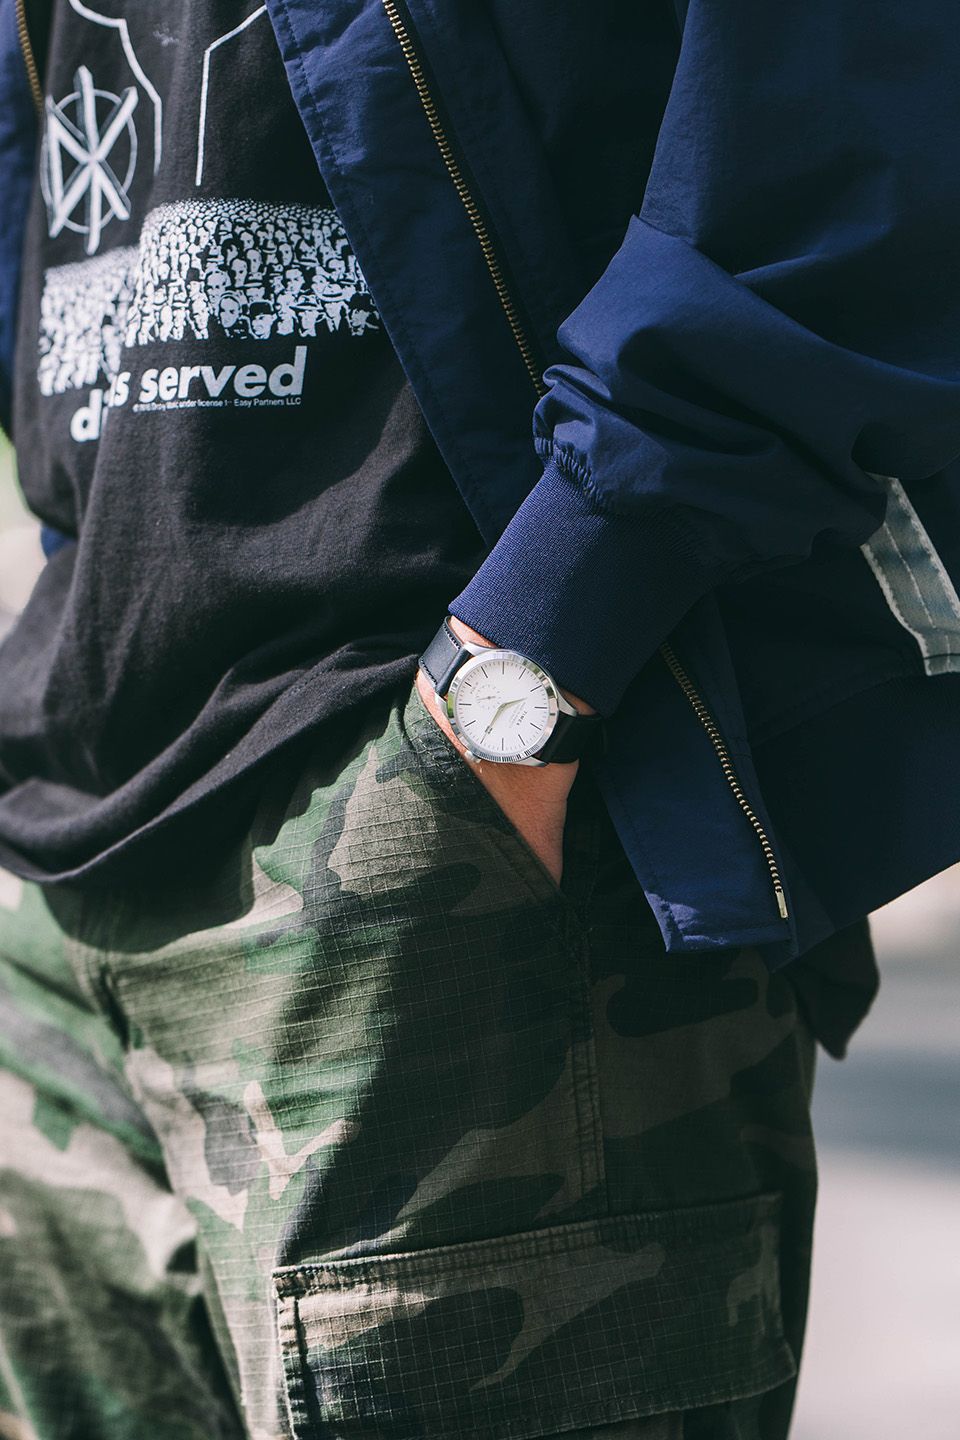 How Our Team Is Wearing Timex's American Documents Watch